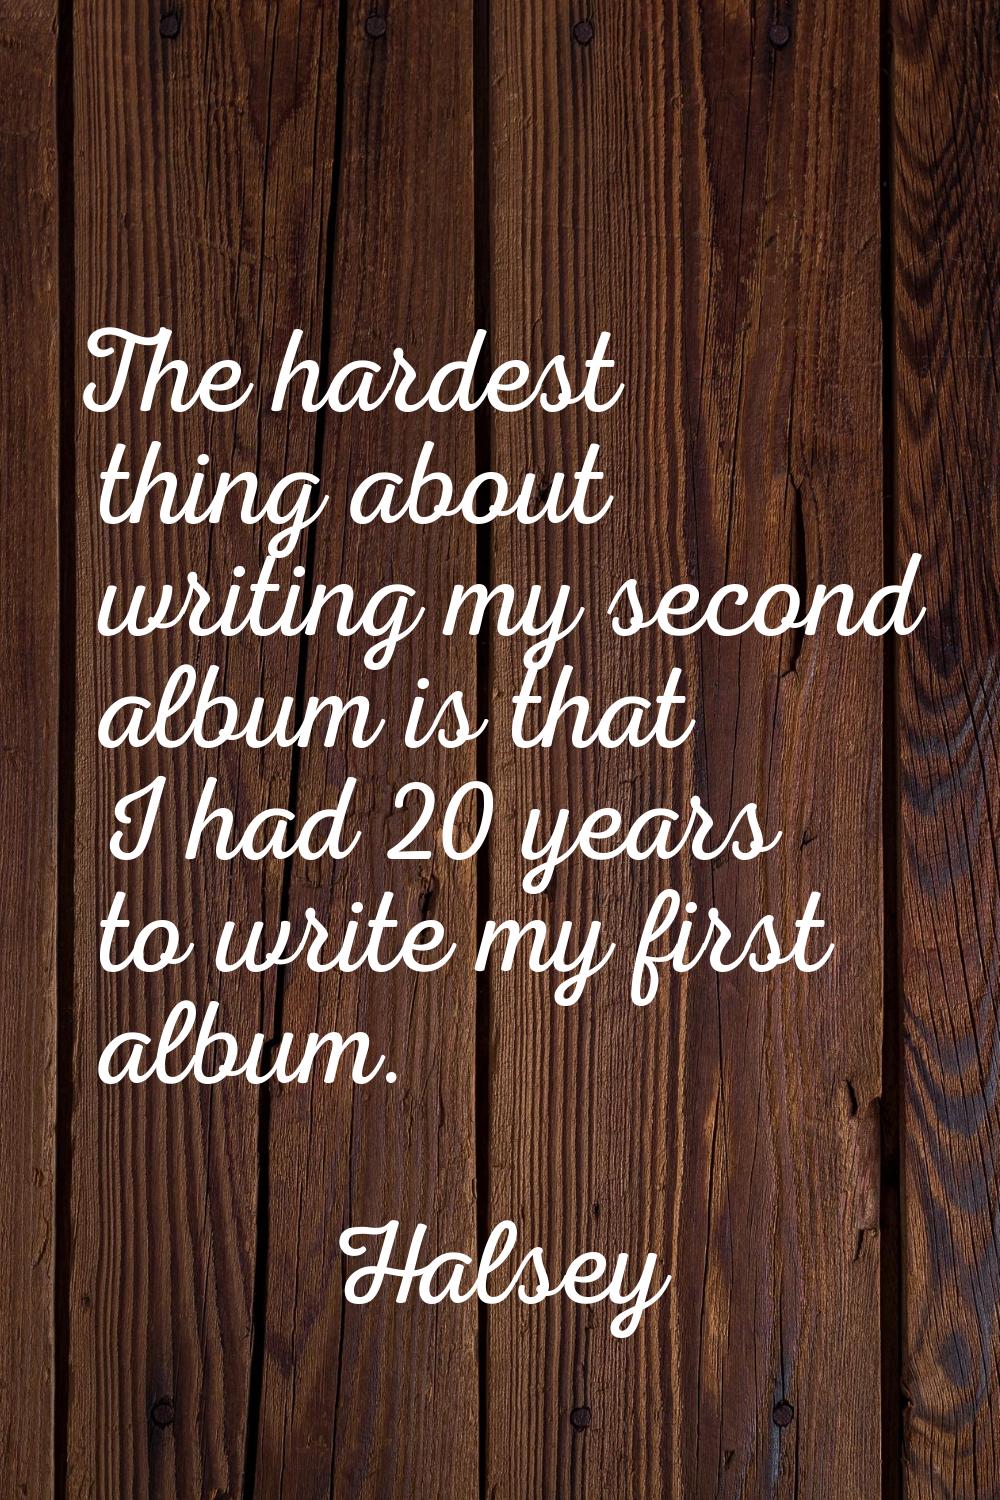 The hardest thing about writing my second album is that I had 20 years to write my first album.